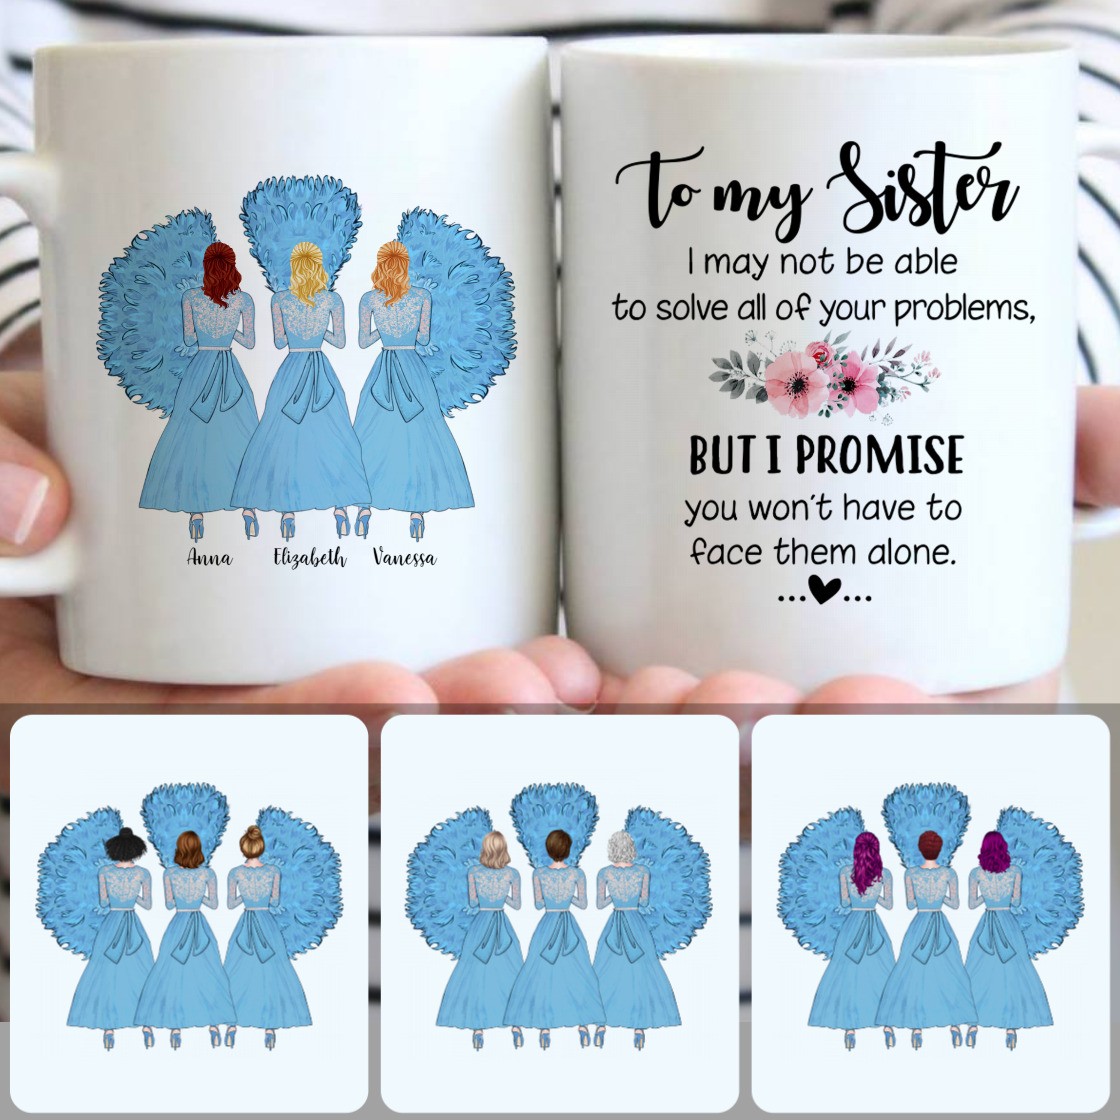 Personalized Mug, Surprise Birthday Gifts, 3 Sisters Customized Coffee Mug With Names